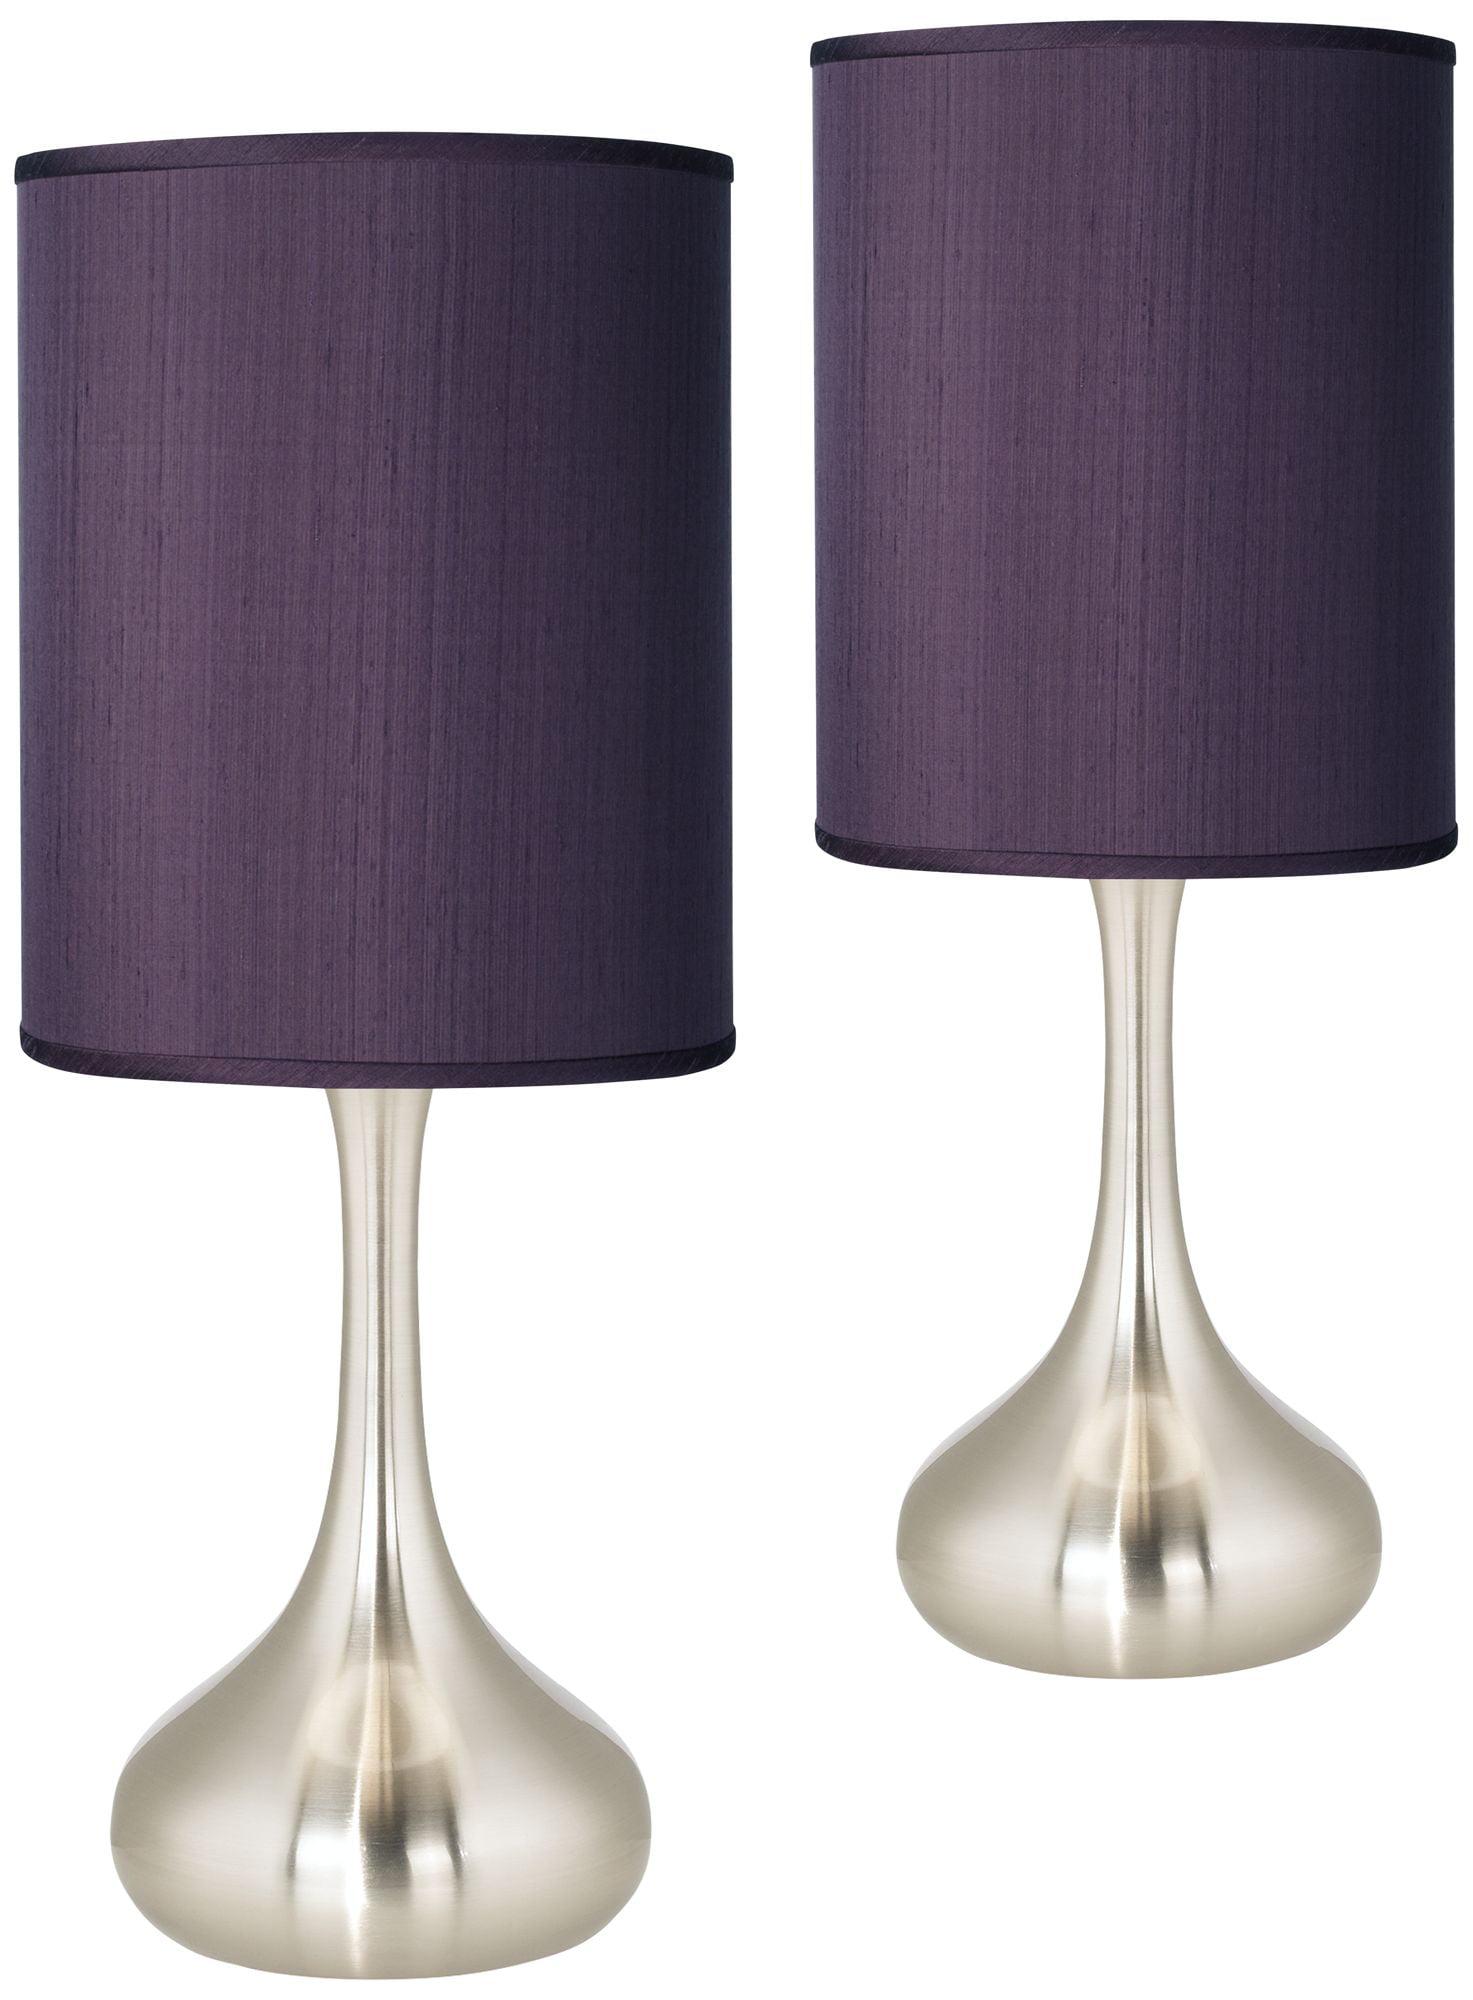 Possini Euro Design Modern Accent Table, Droplet Table Lamp Shade